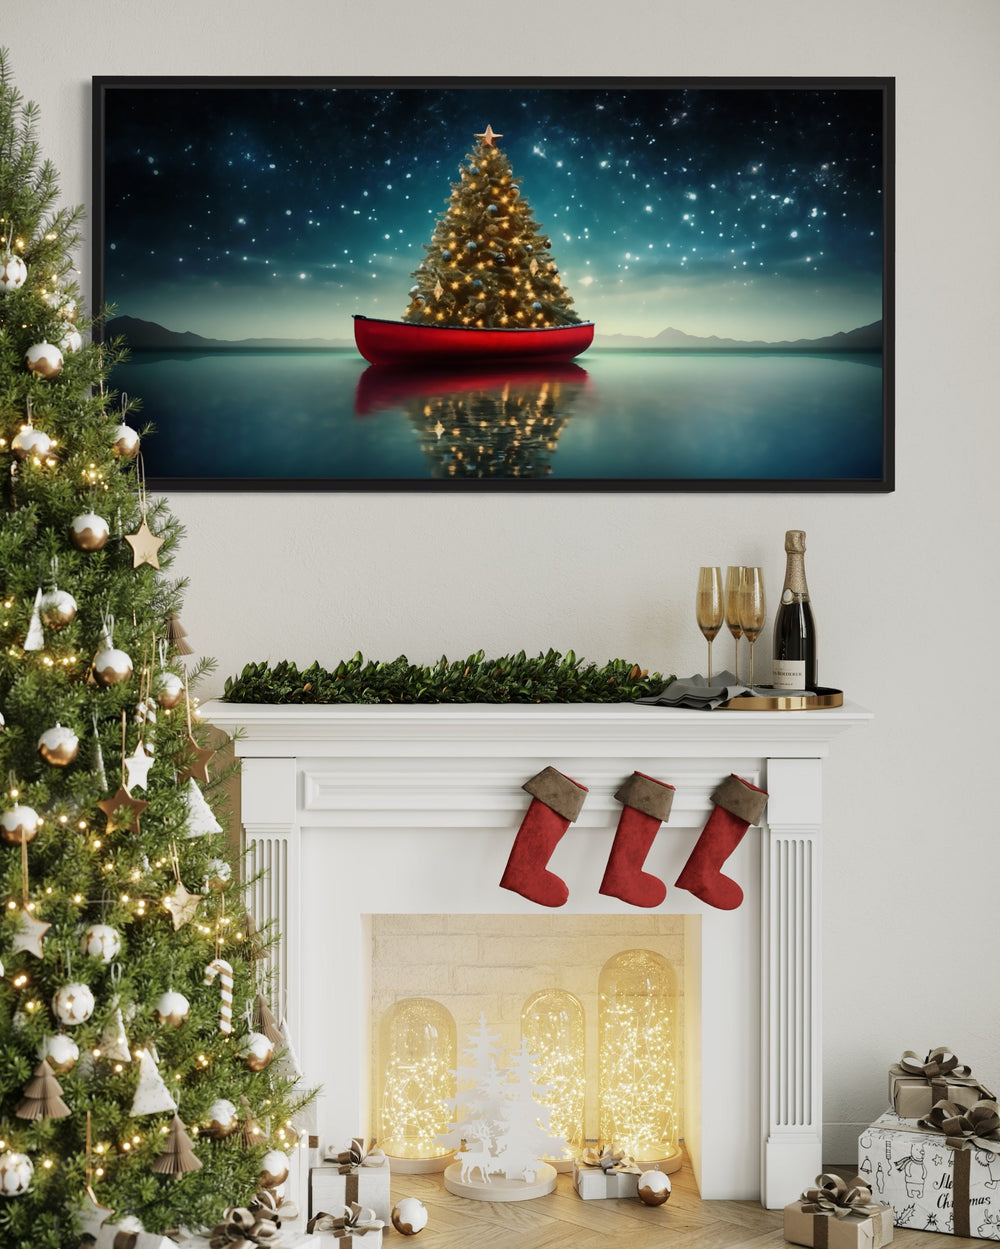 Christmas Tree In Red Canoe Wall Art "Holiday Voyage" over christmas mantel